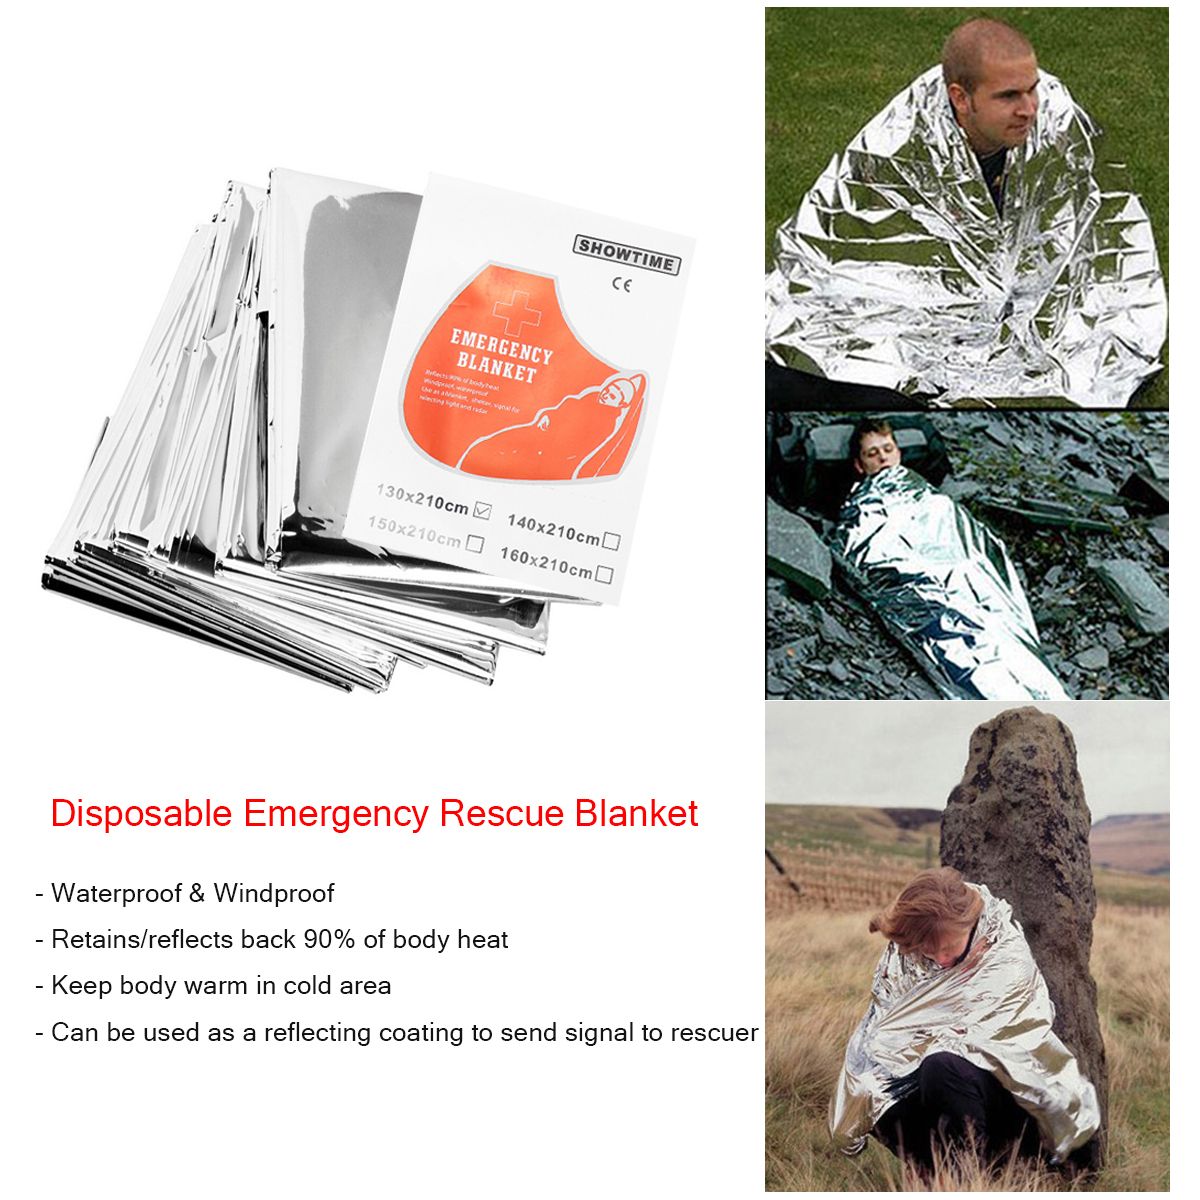 SOS-Emergency-Equipment-Tools-Kit-Survival-Tactical-Hunting-Tool-First-Aid-Box-1300694